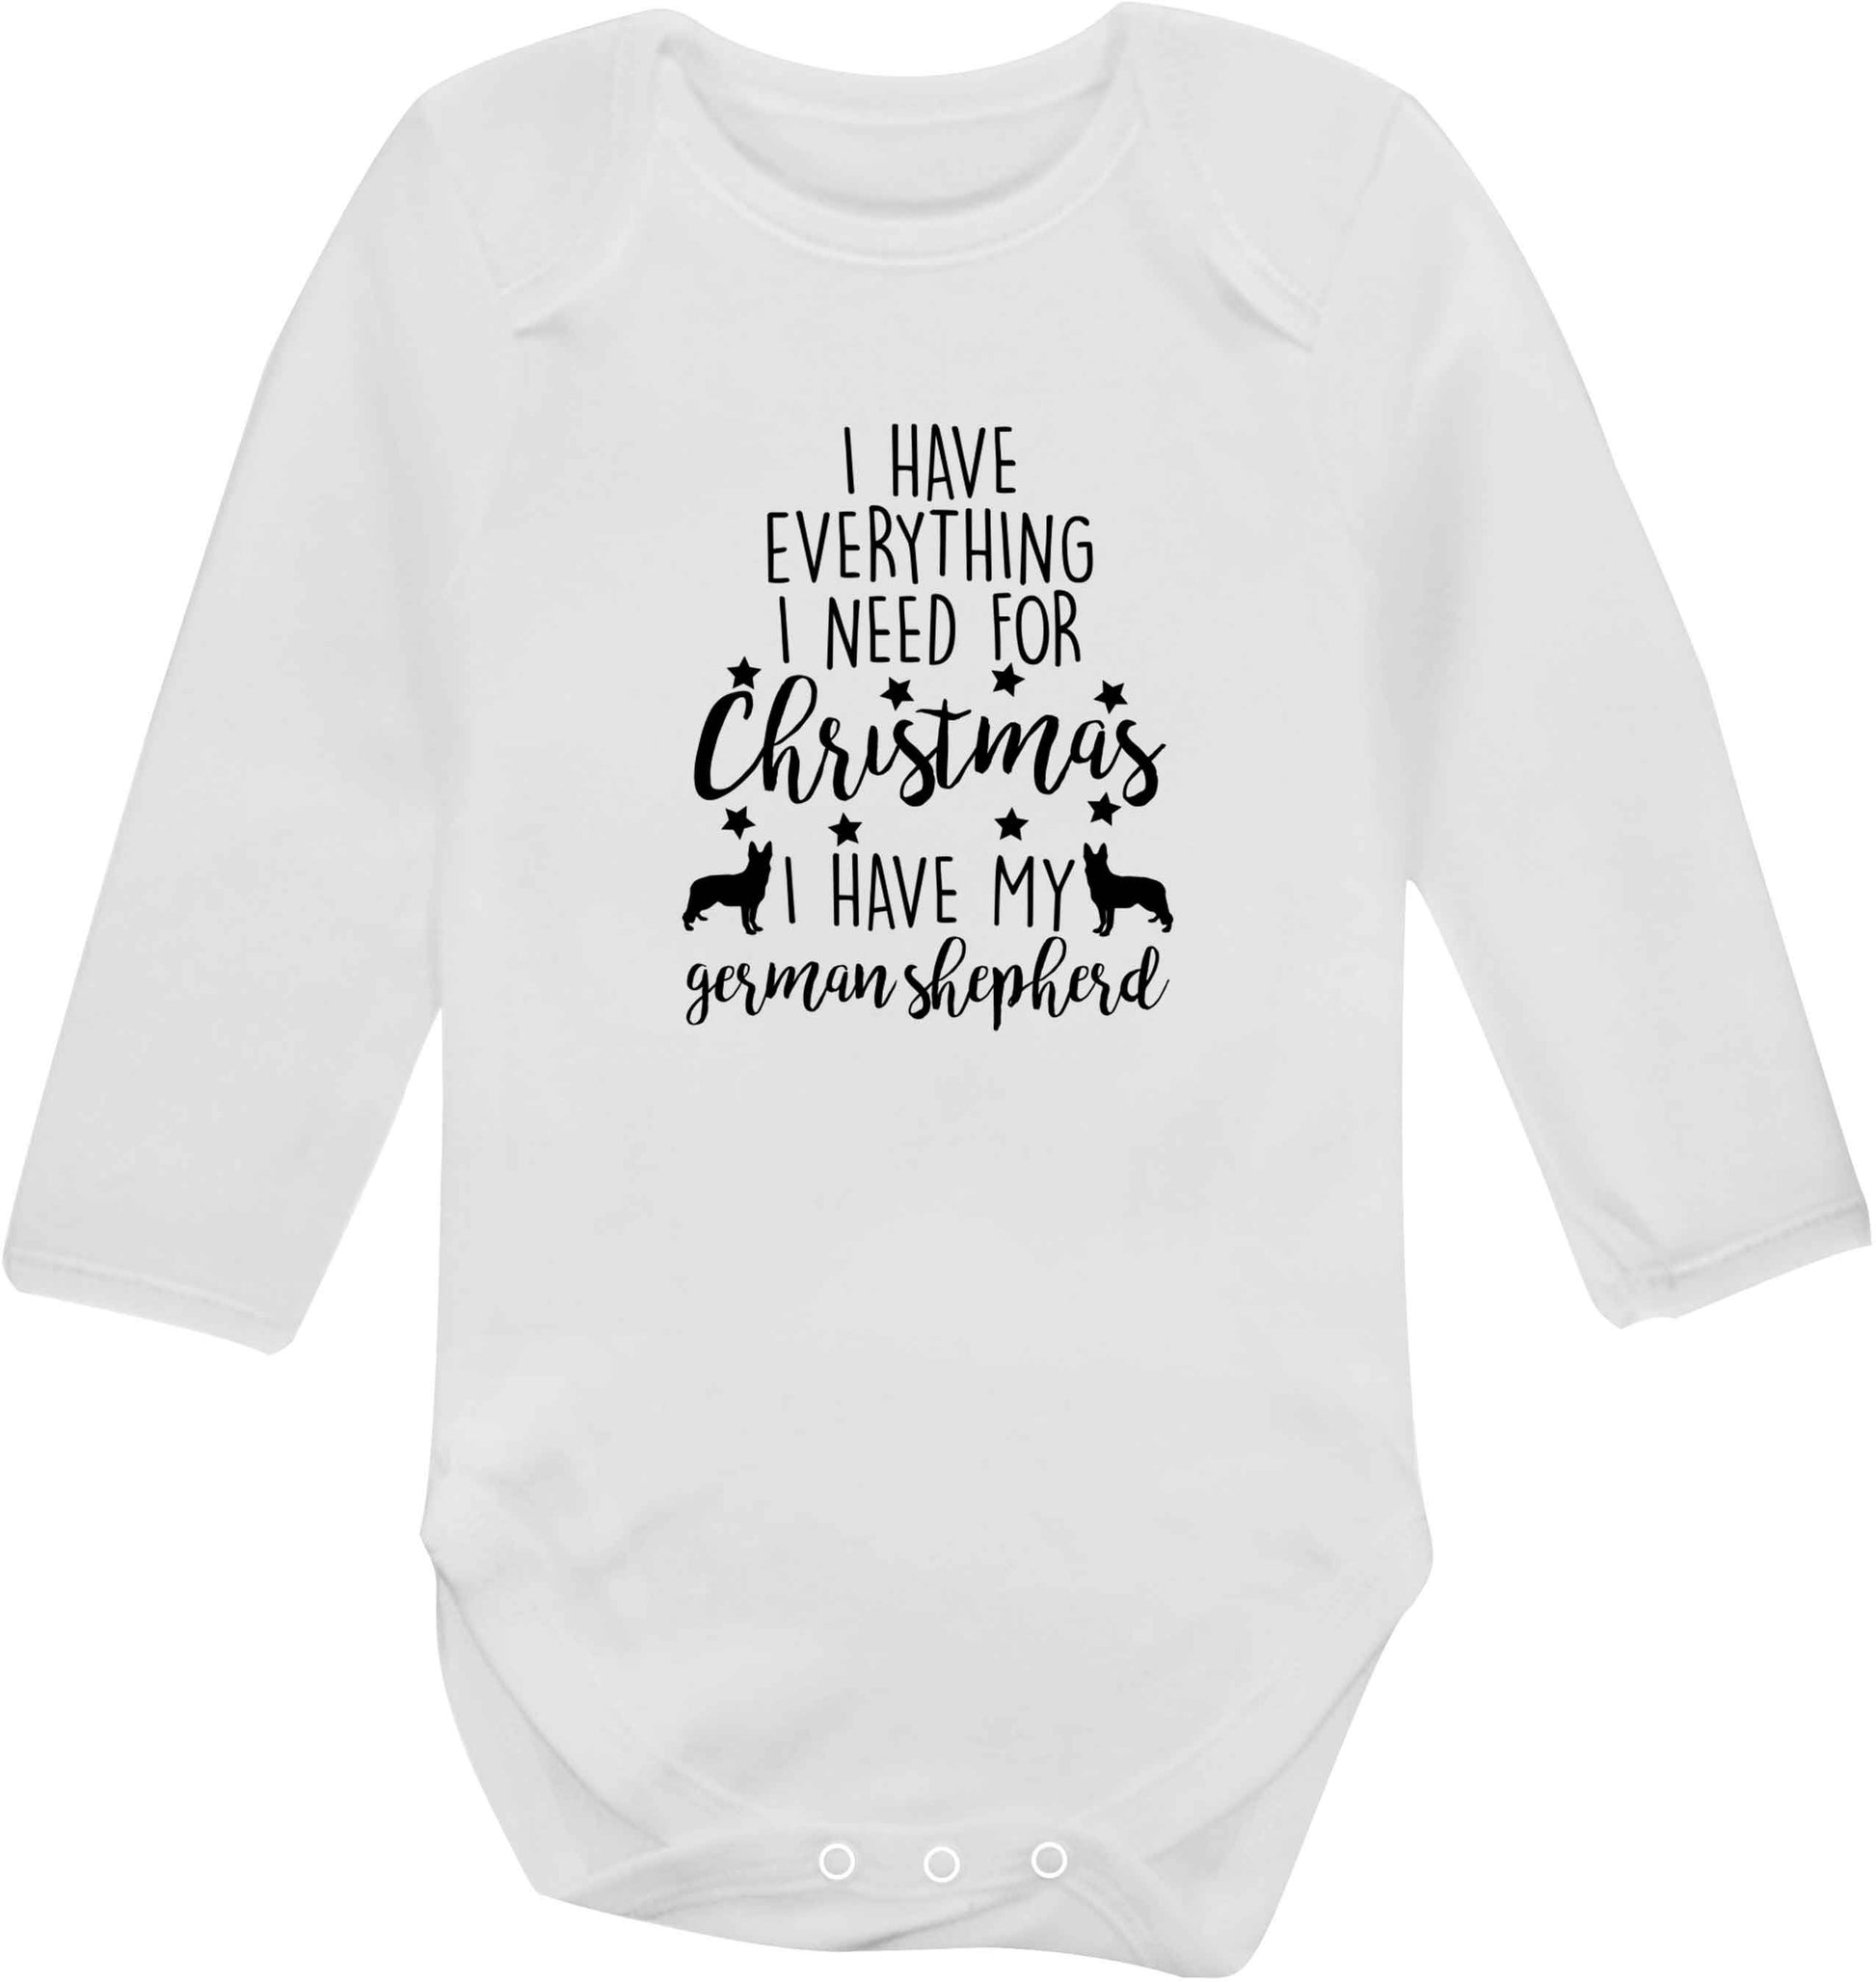 I have everything I need for Christmas I have my german shepherd baby vest long sleeved white 6-12 months